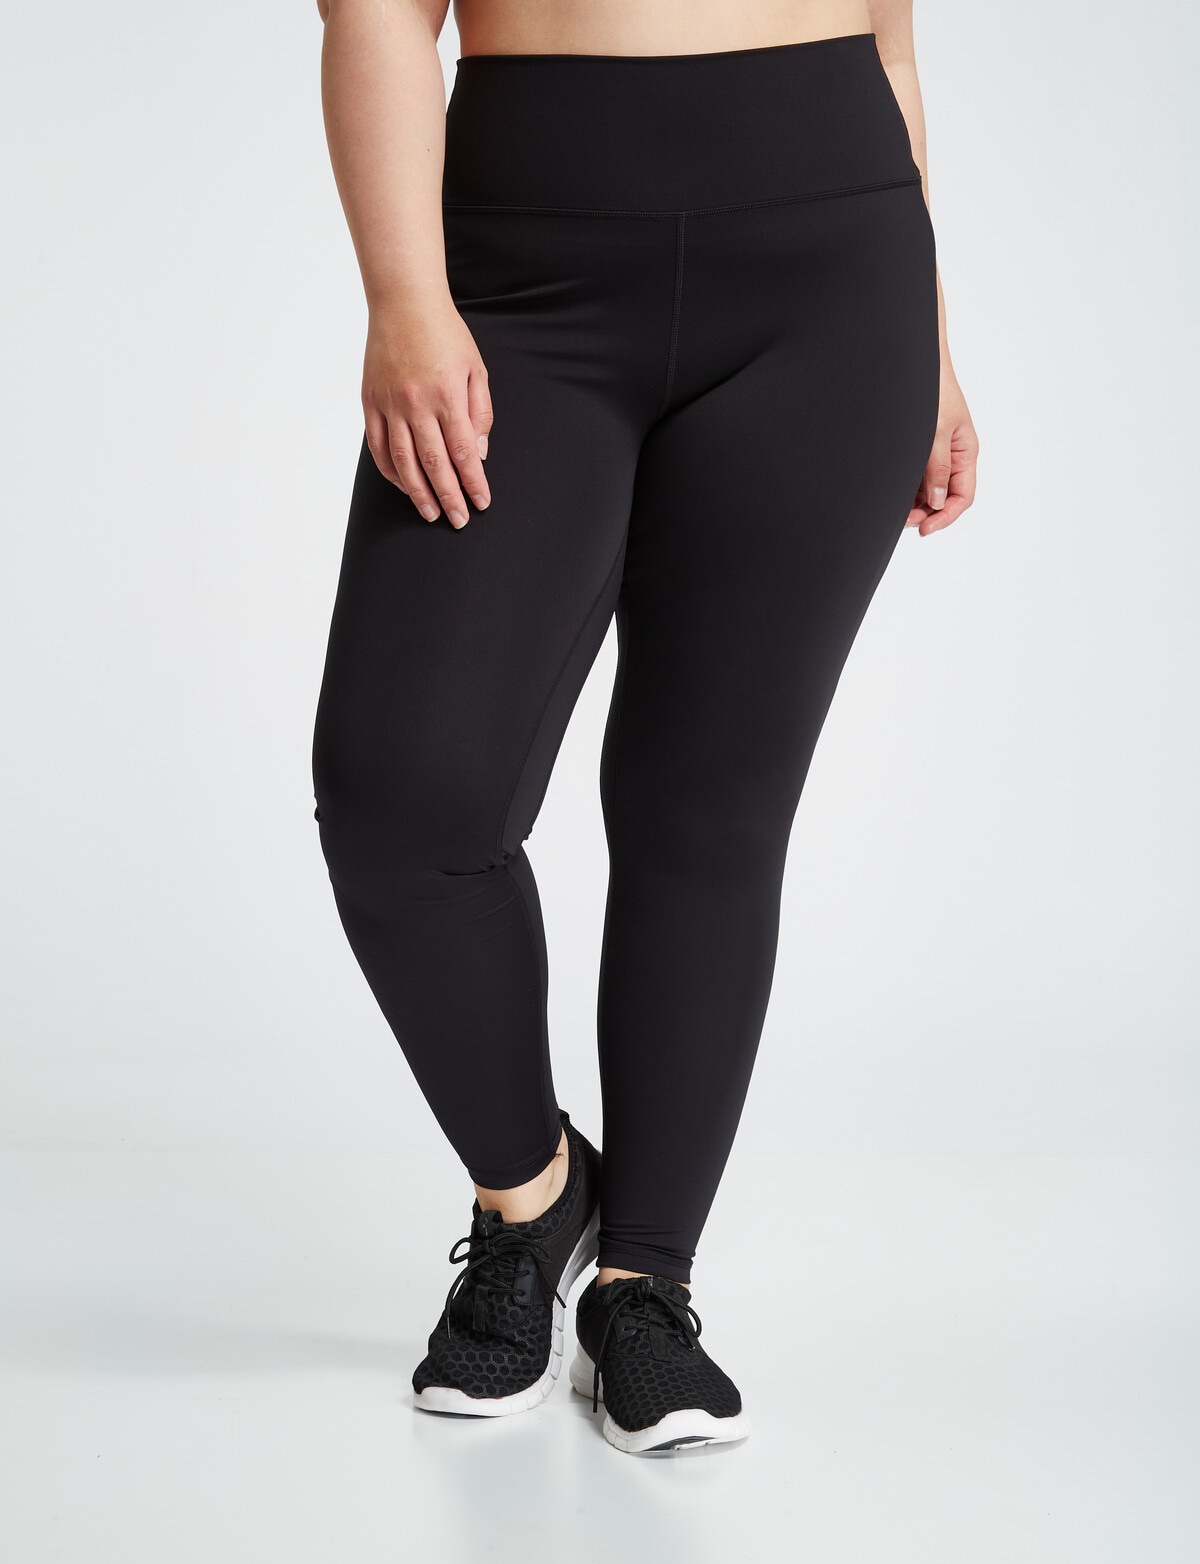 Amazon.com: FULLSOFT 2 Pack Plus Size Fleece Lined Leggings for Women -  High Waist Stretchy 1X-4X Yoga Pants - Thermal Leggings for Winter Workout  Running(XL-Black,Coffee) : Clothing, Shoes & Jewelry